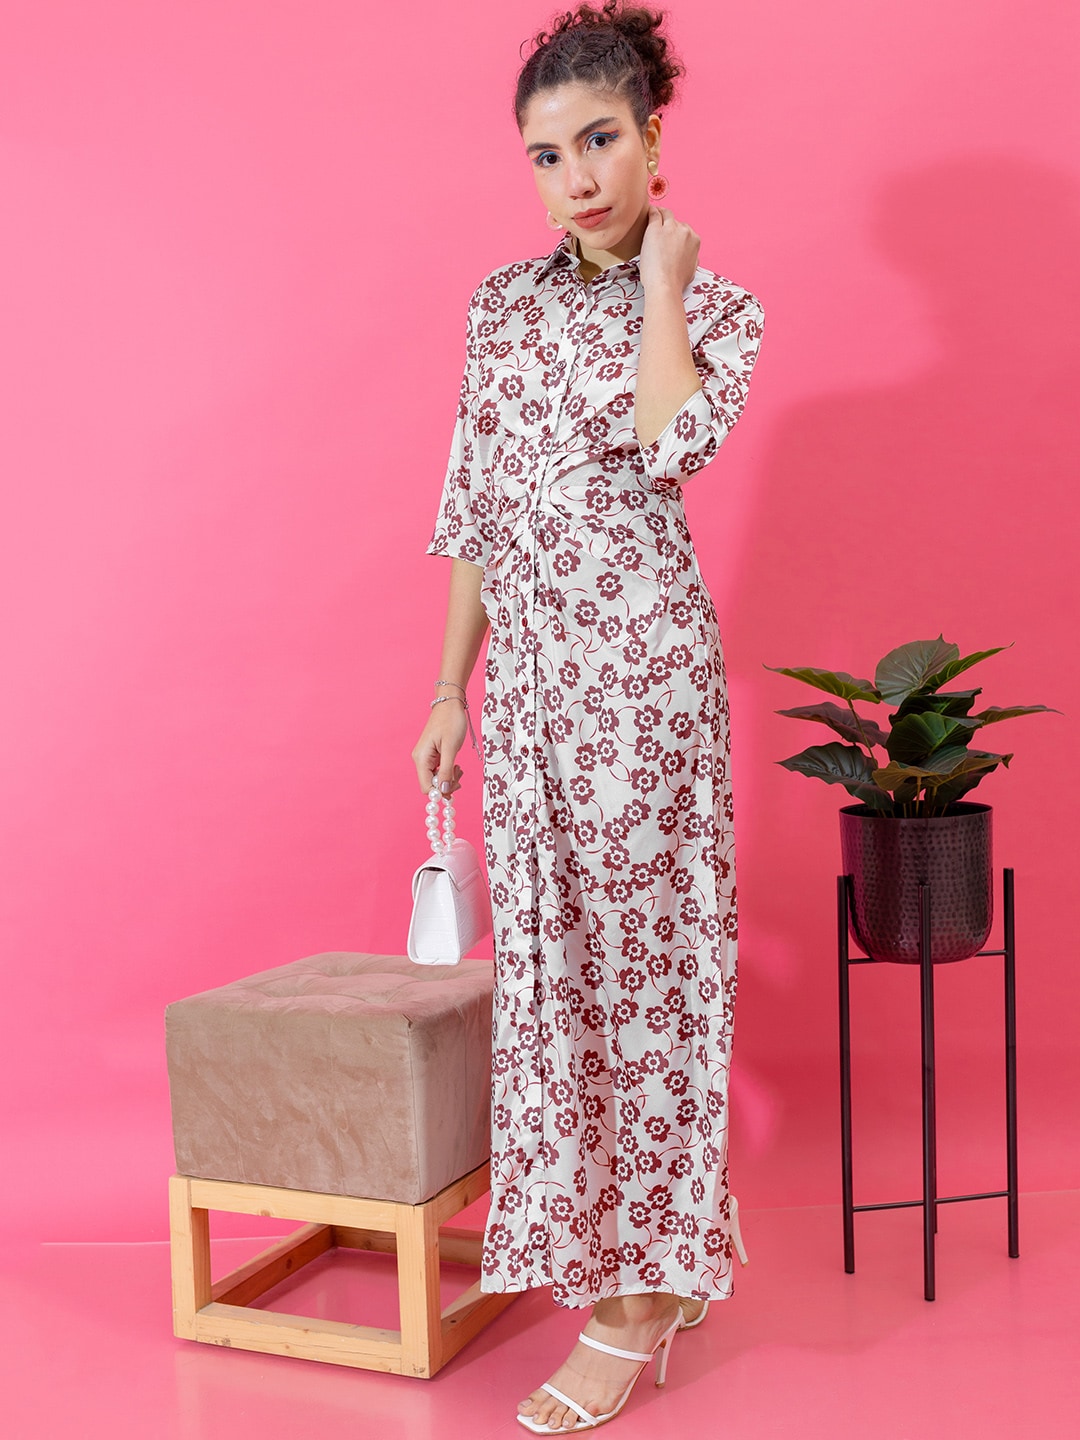 Stylecast X Hersheinbox Floral Printed Satin Maxi Dress Price in India